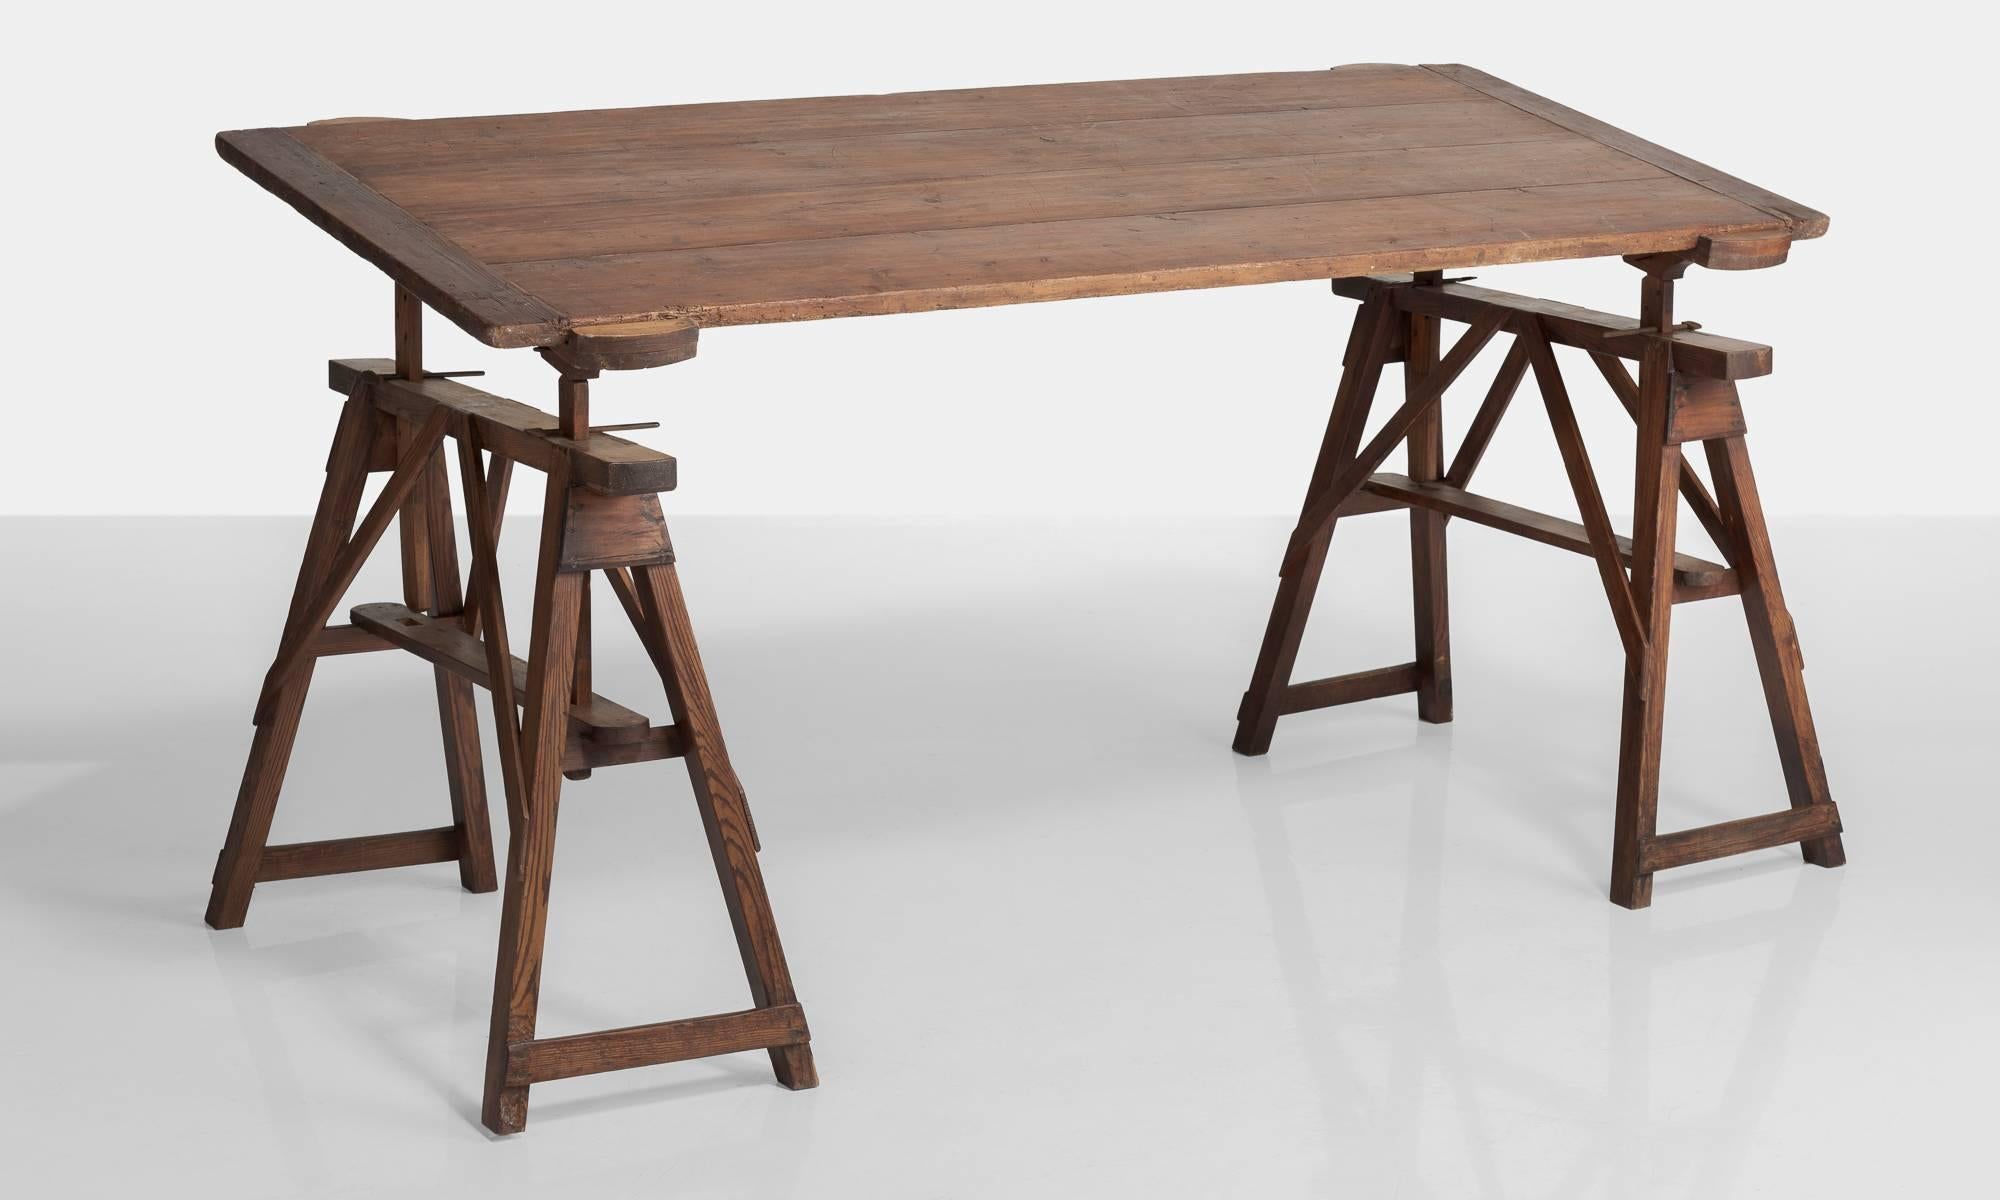 French Architect's Table, circa 1910